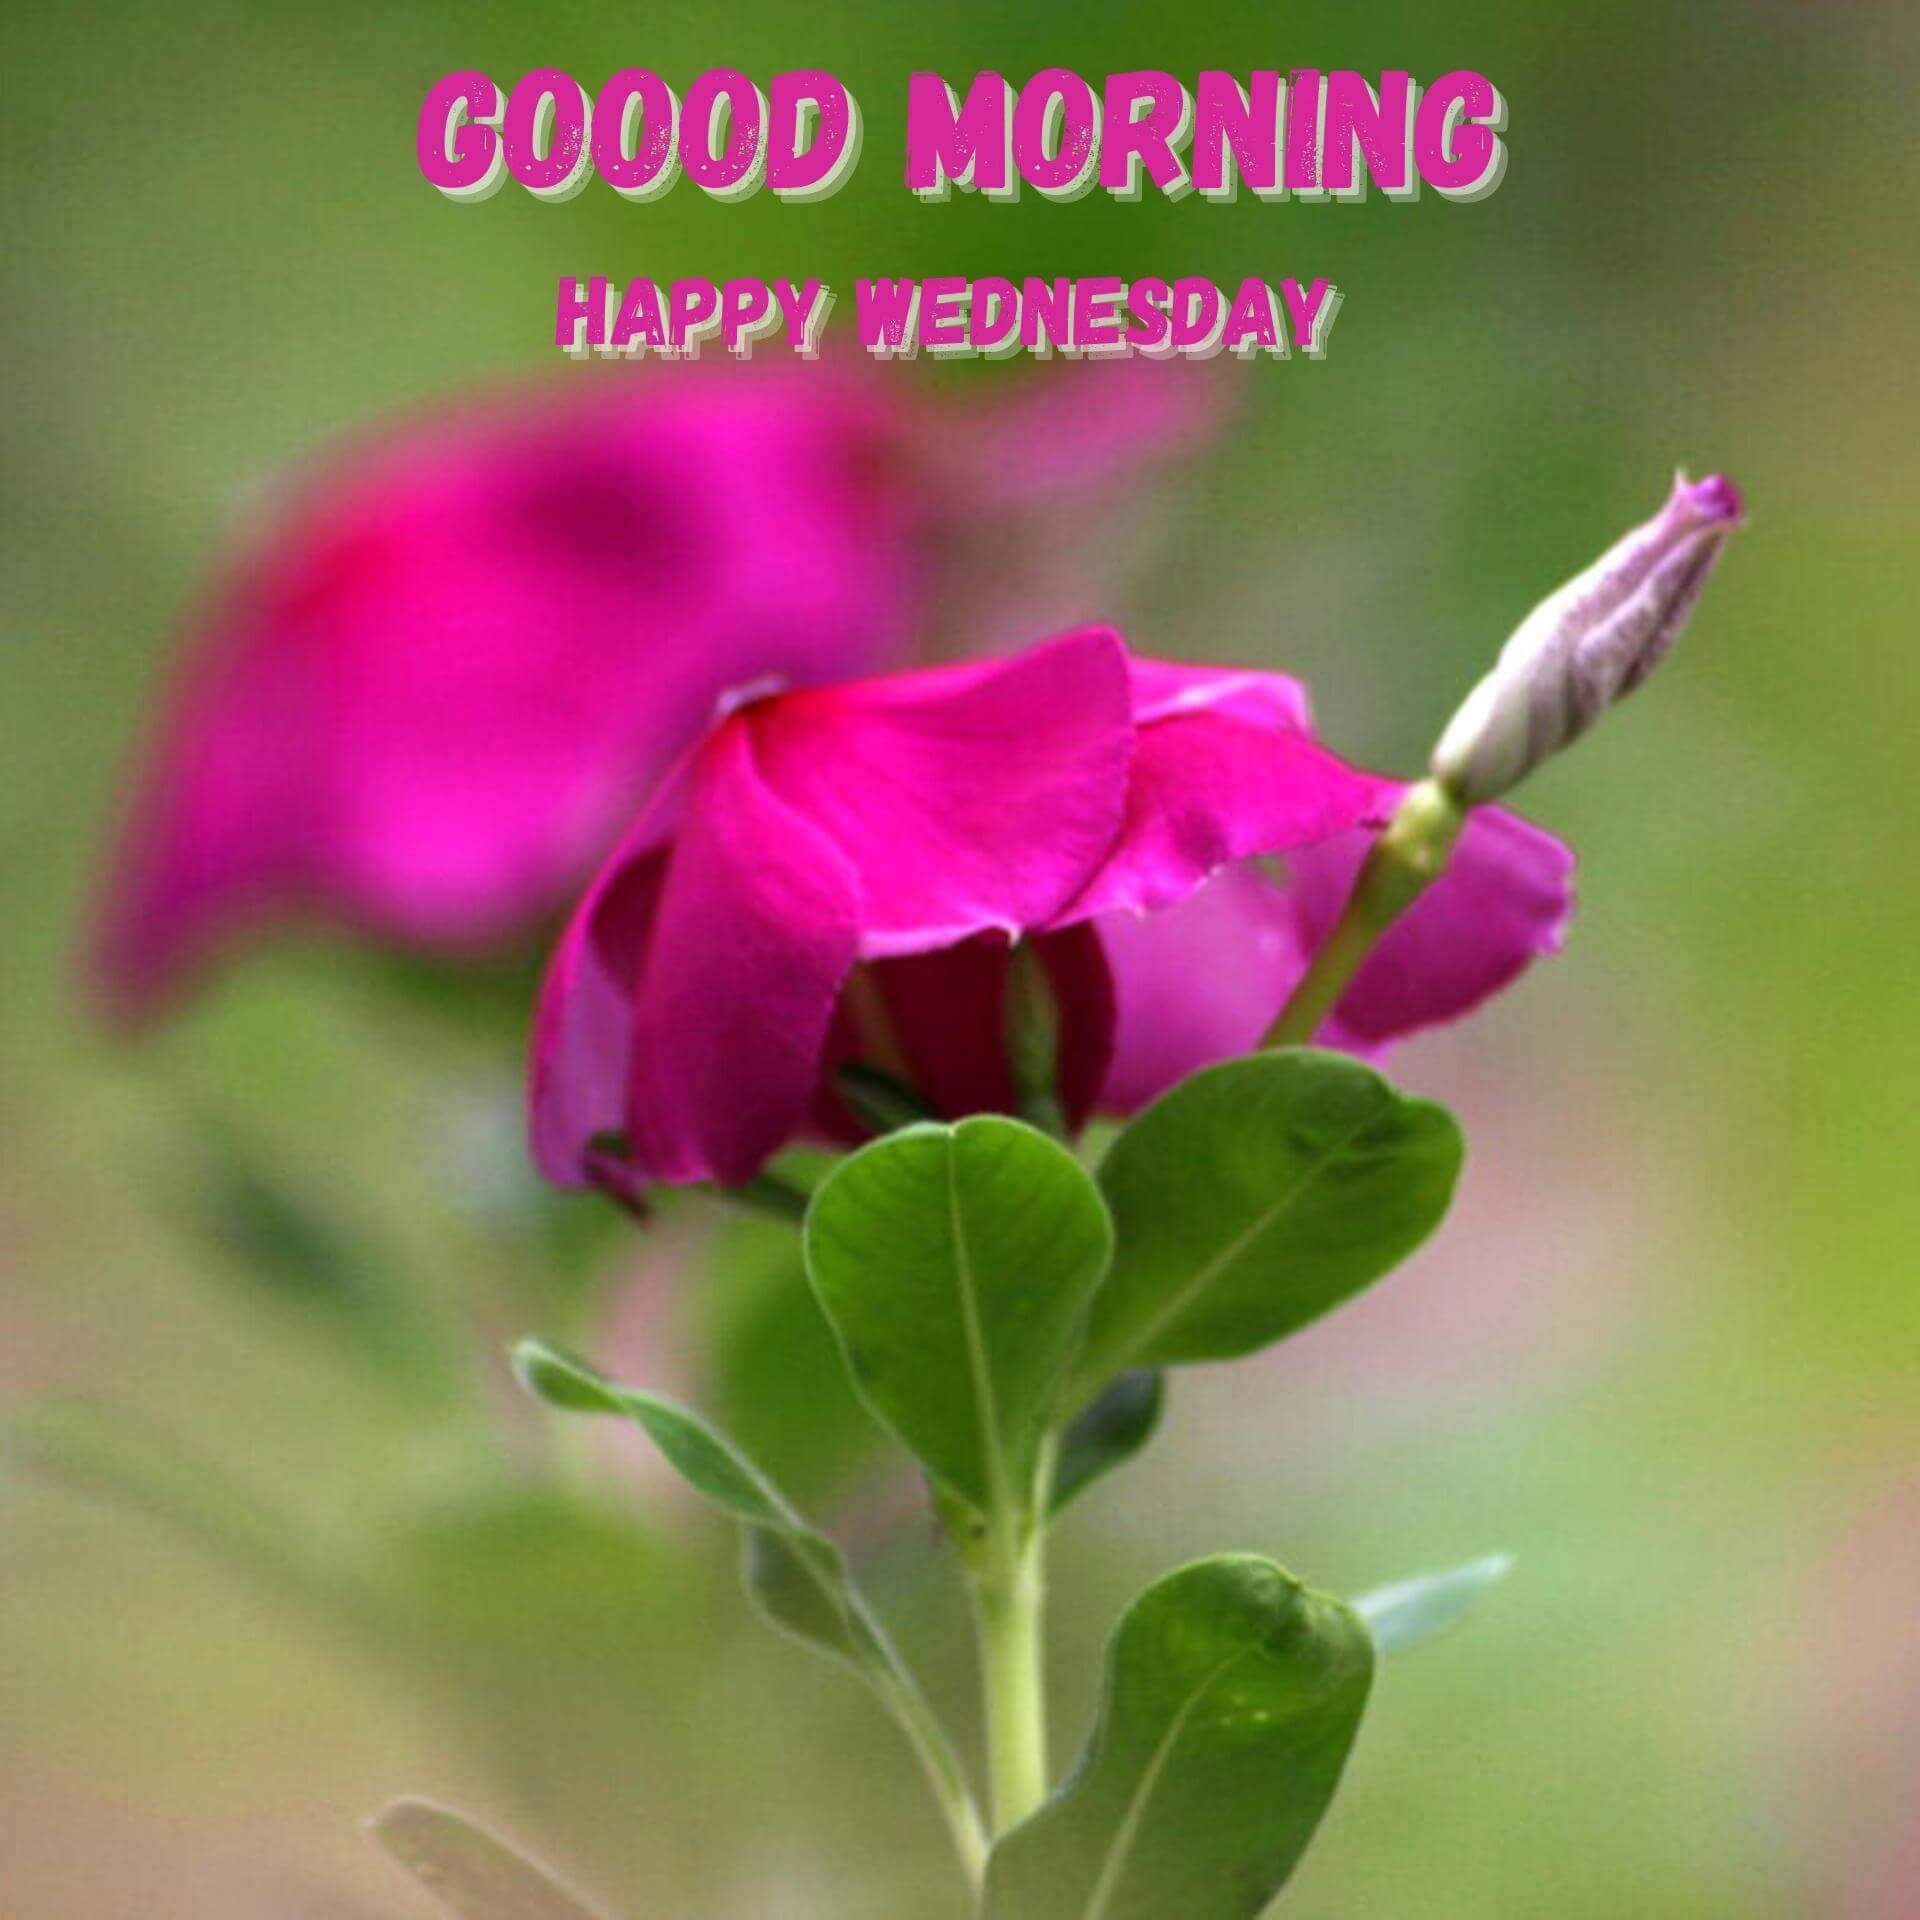 Wednesday good morning Wallpaper pics New Download